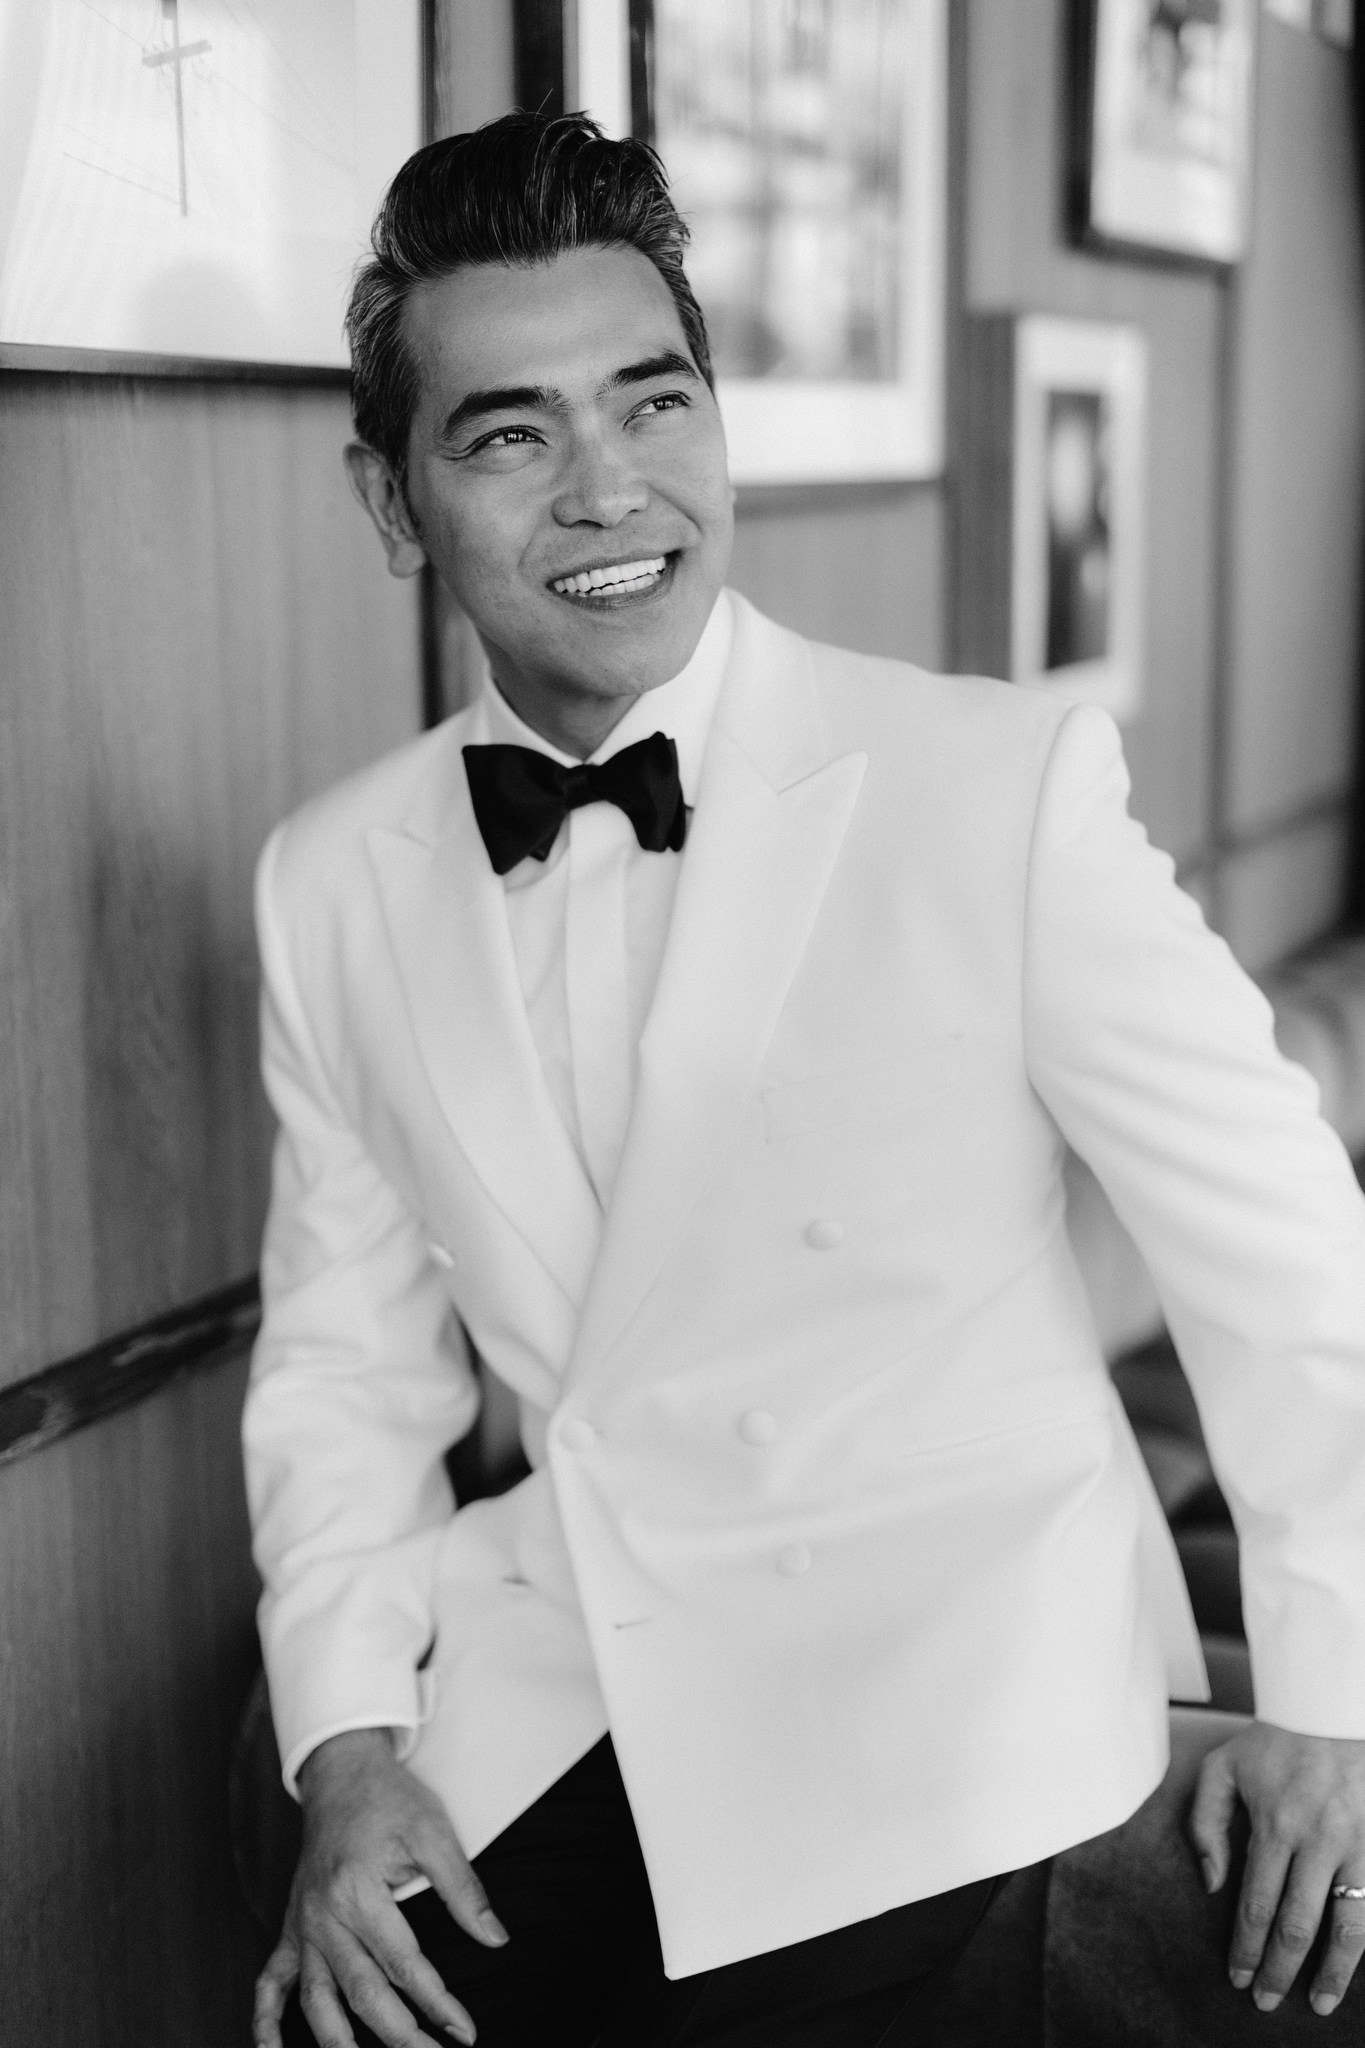 Man smiling wearing white suit with black bow tie and wedding band on his finger